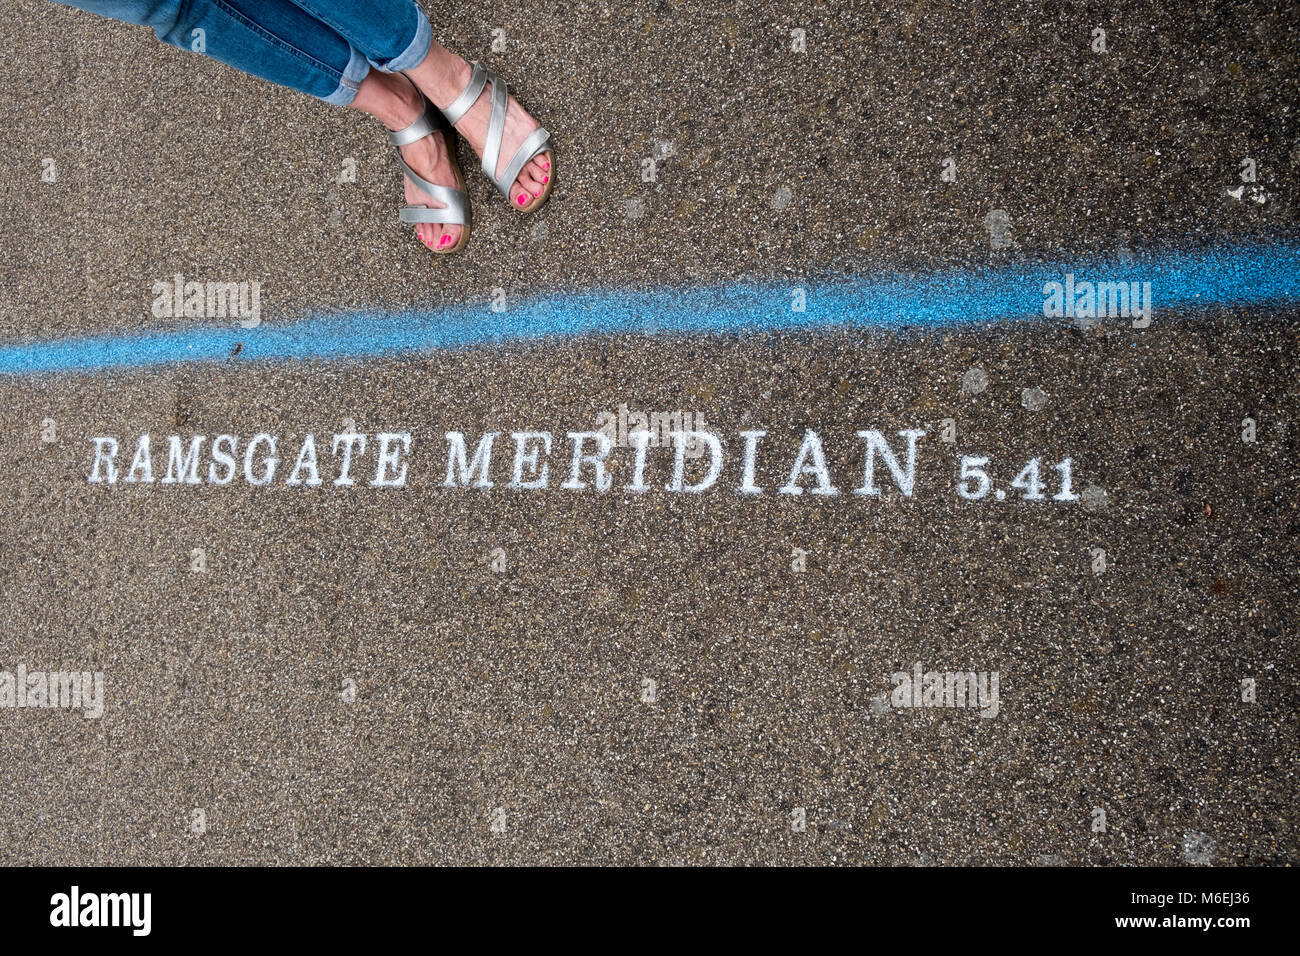 For the 2017 Ramsgate Festival artist Theresa Smith, is celebrating that the town has its own Meridian Line  - 5 minutes and 41 seconds ahead of Greenwich Mean Time. Stock Photo